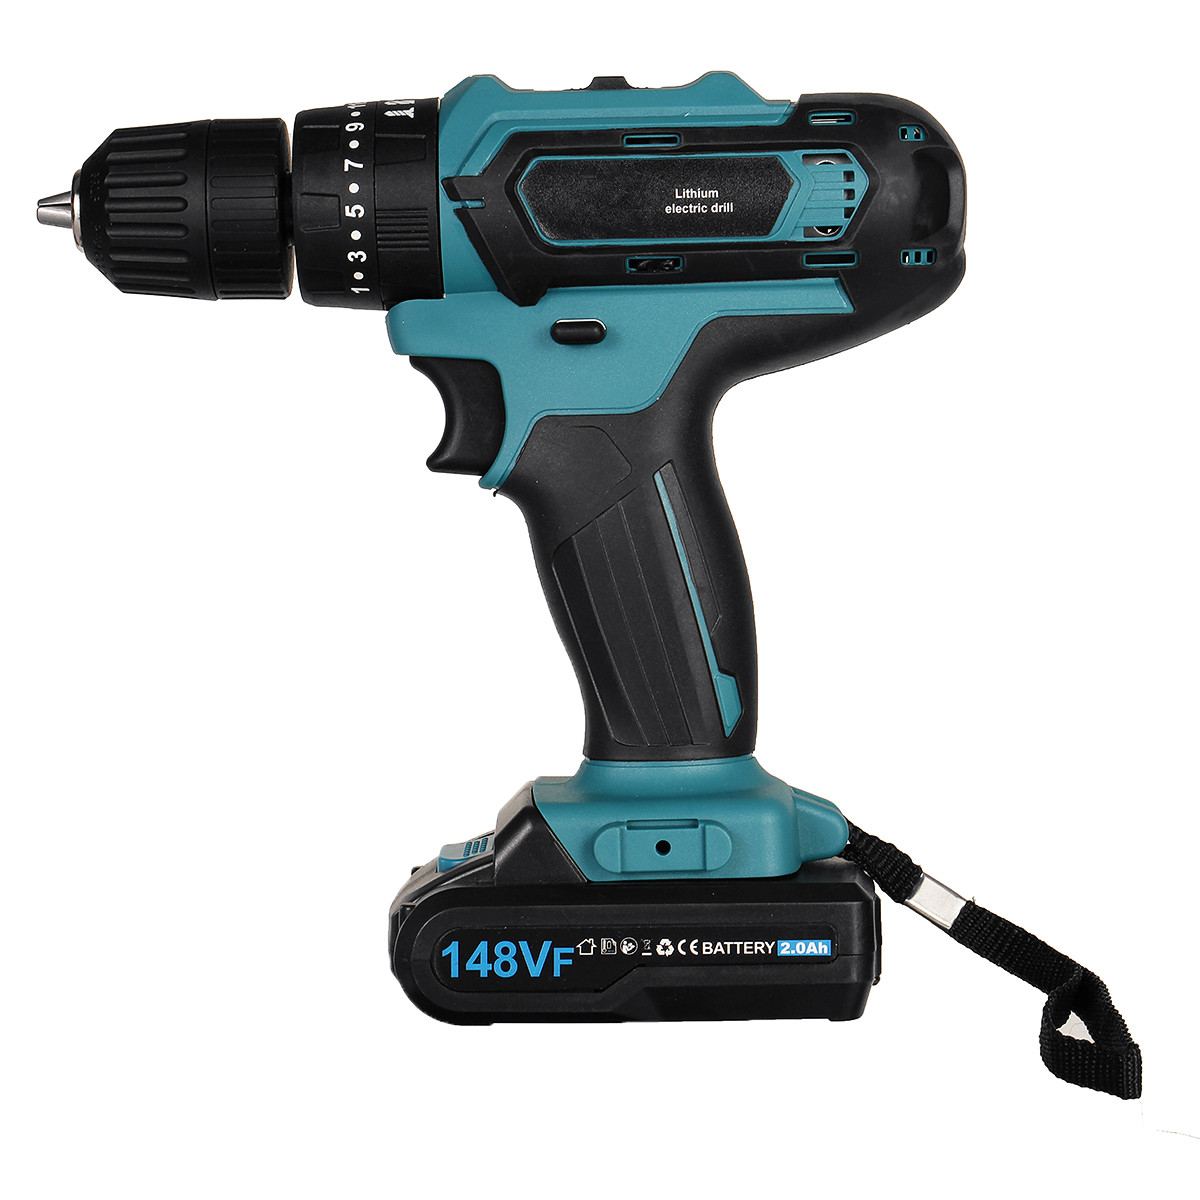 148VF-20Ah-Cordless-Electric-Impact-Drill-Rechargeable-Drill-Screwdriver-W-1-or-2-Li-ion-Battery-1888042-4